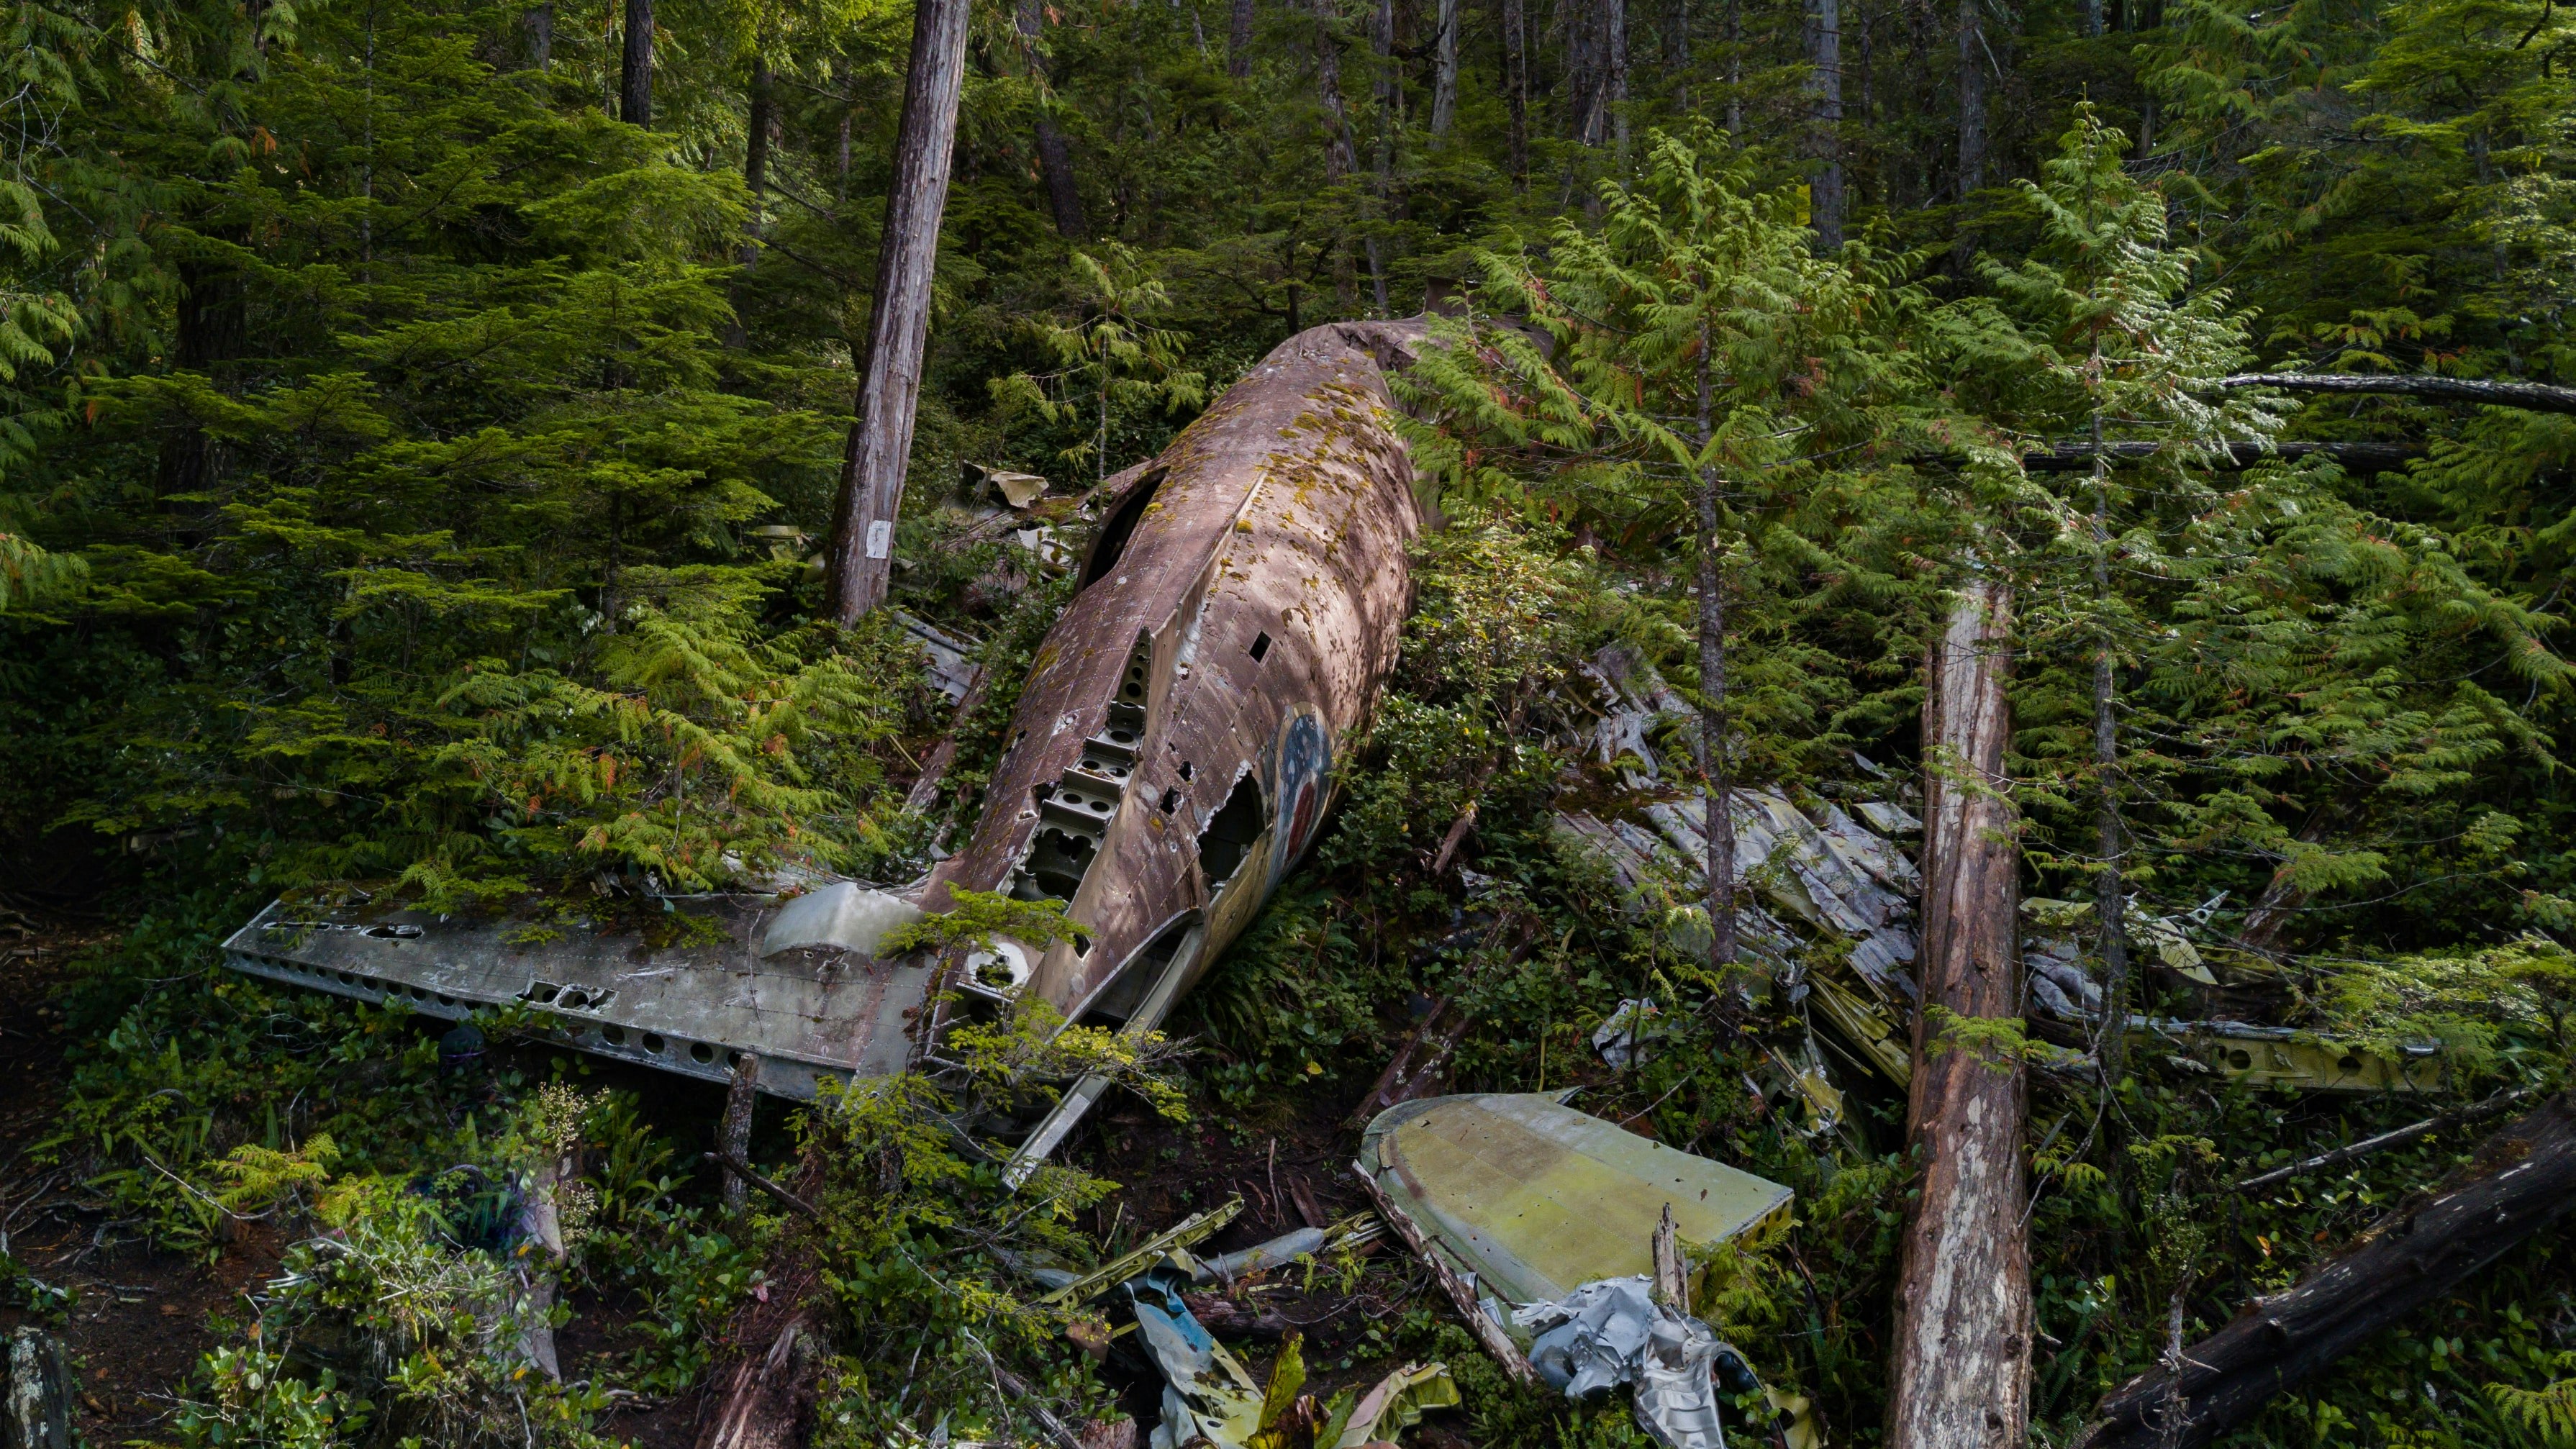 The wreckage of a plane that crashed in a forest.